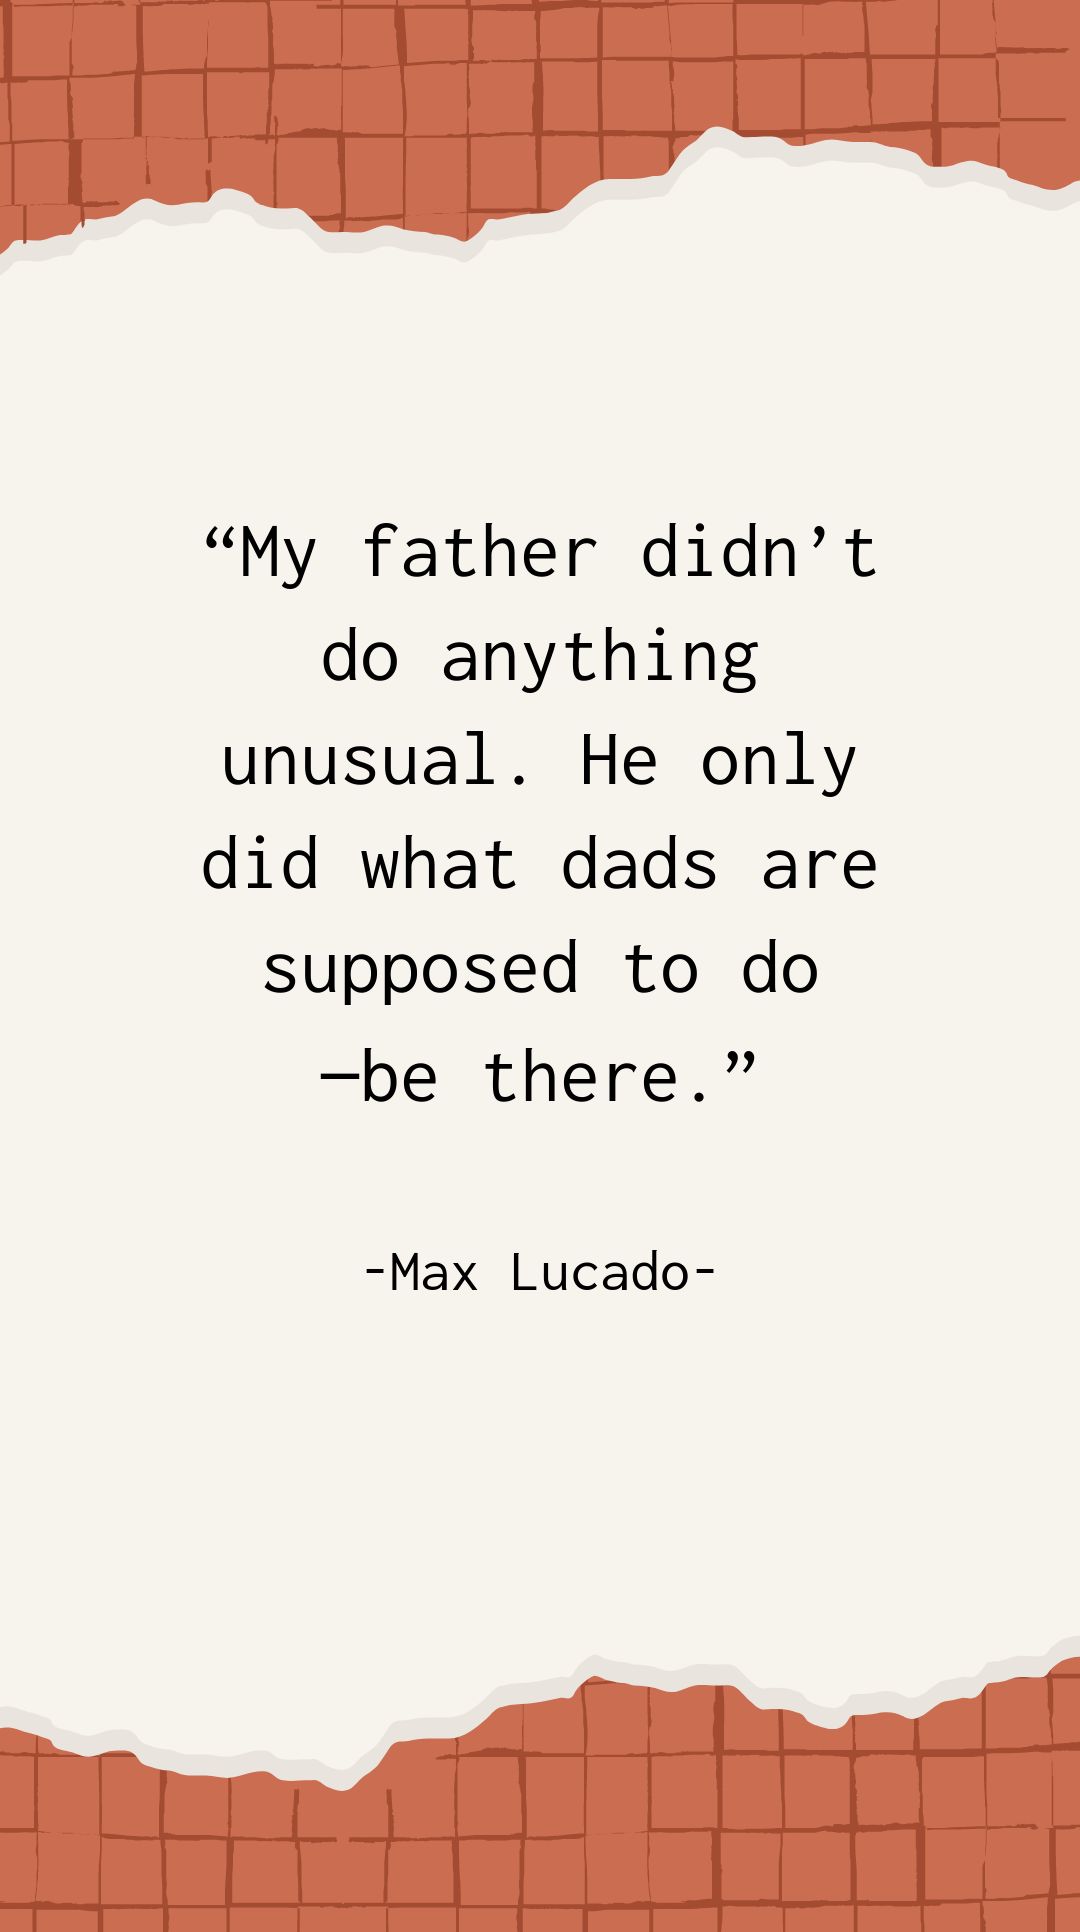 Max Lucado - My father didn’t do anything unusual. He only did what dads are supposed to do be there.